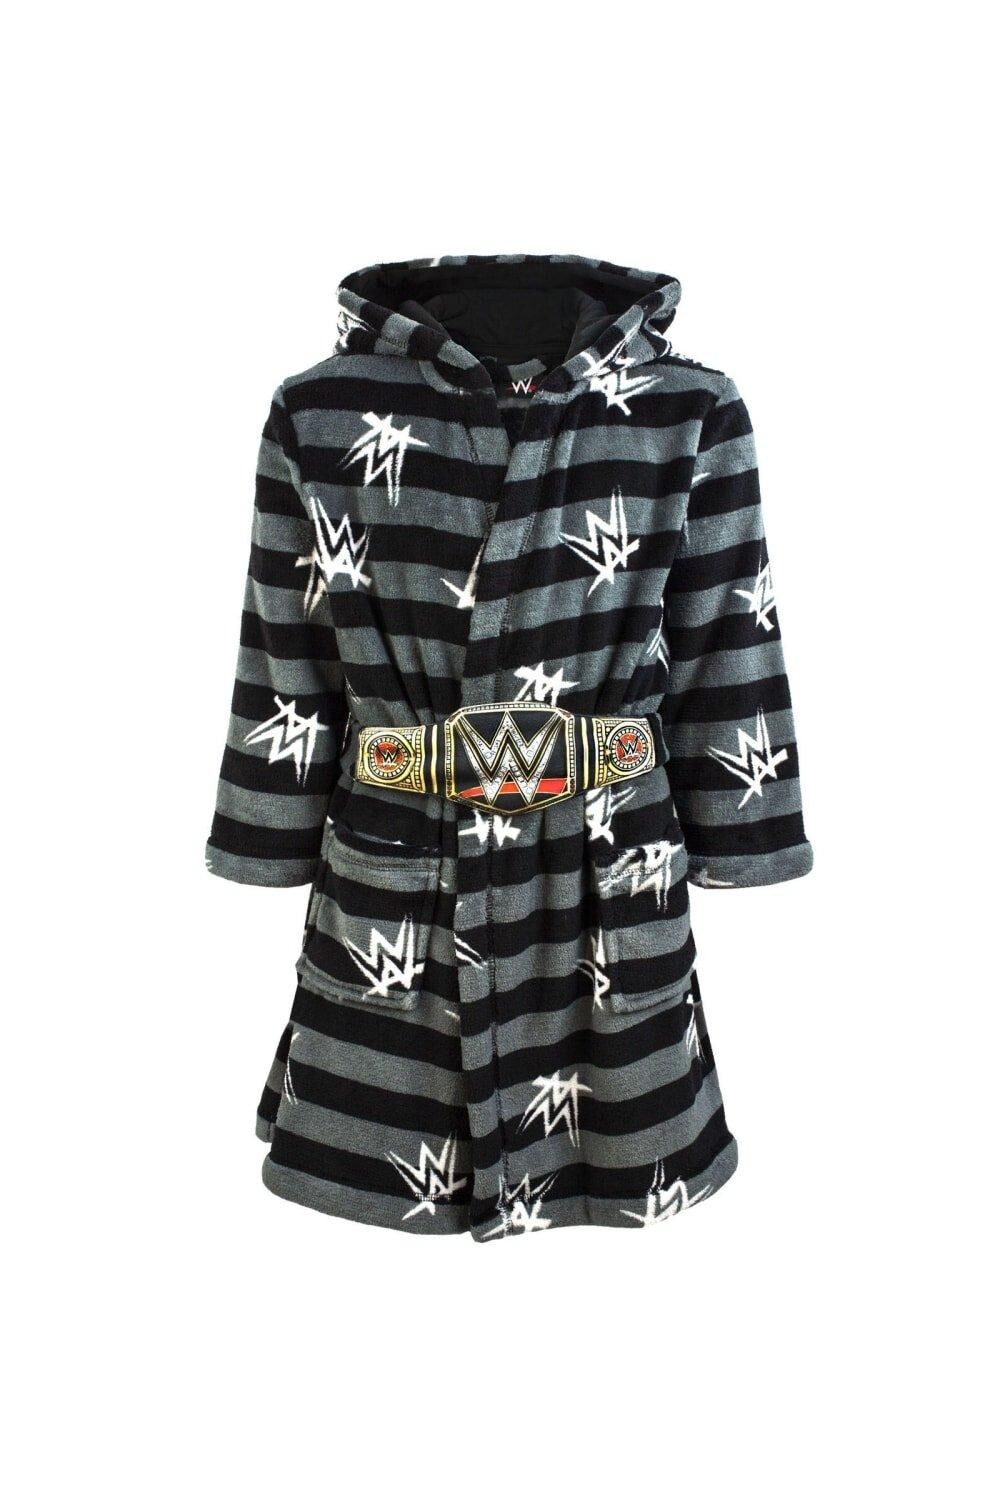 WWE Championship Title Belt Dressing Gown